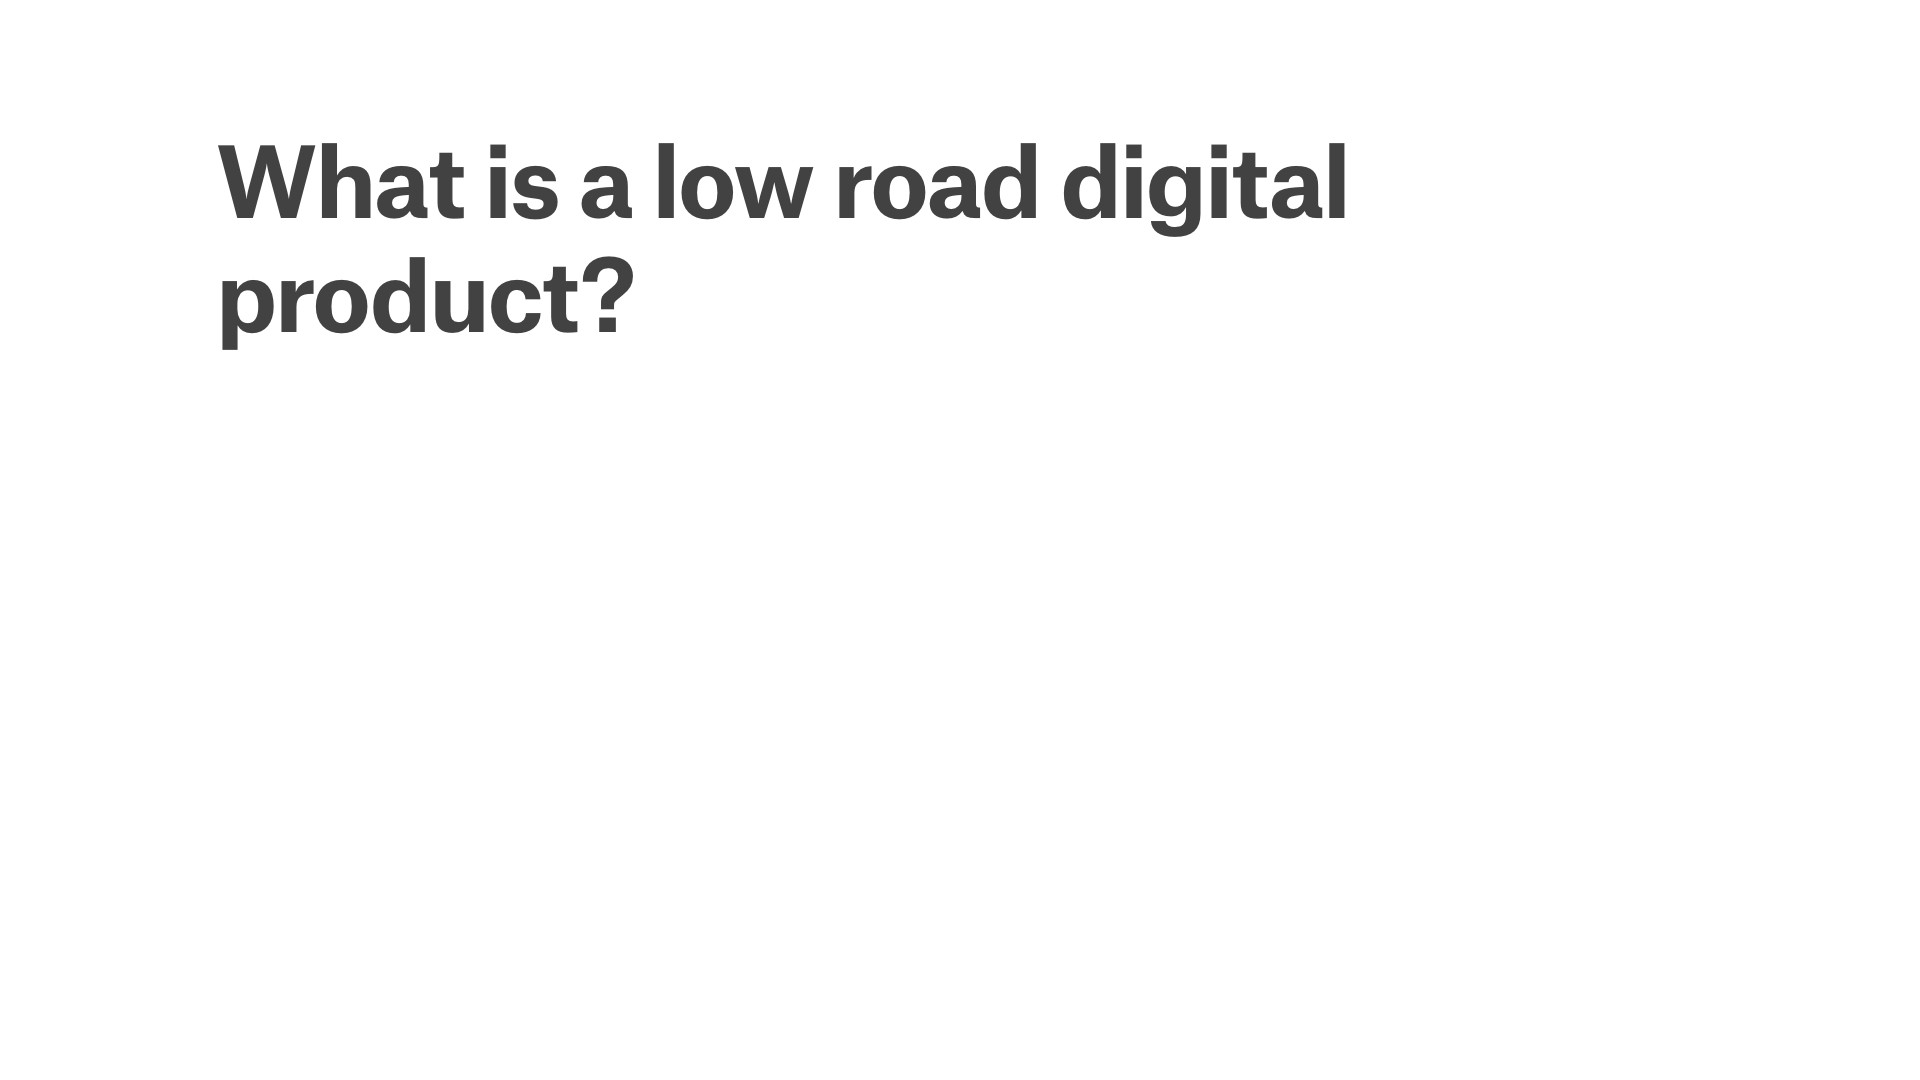 What is a low road digital product?